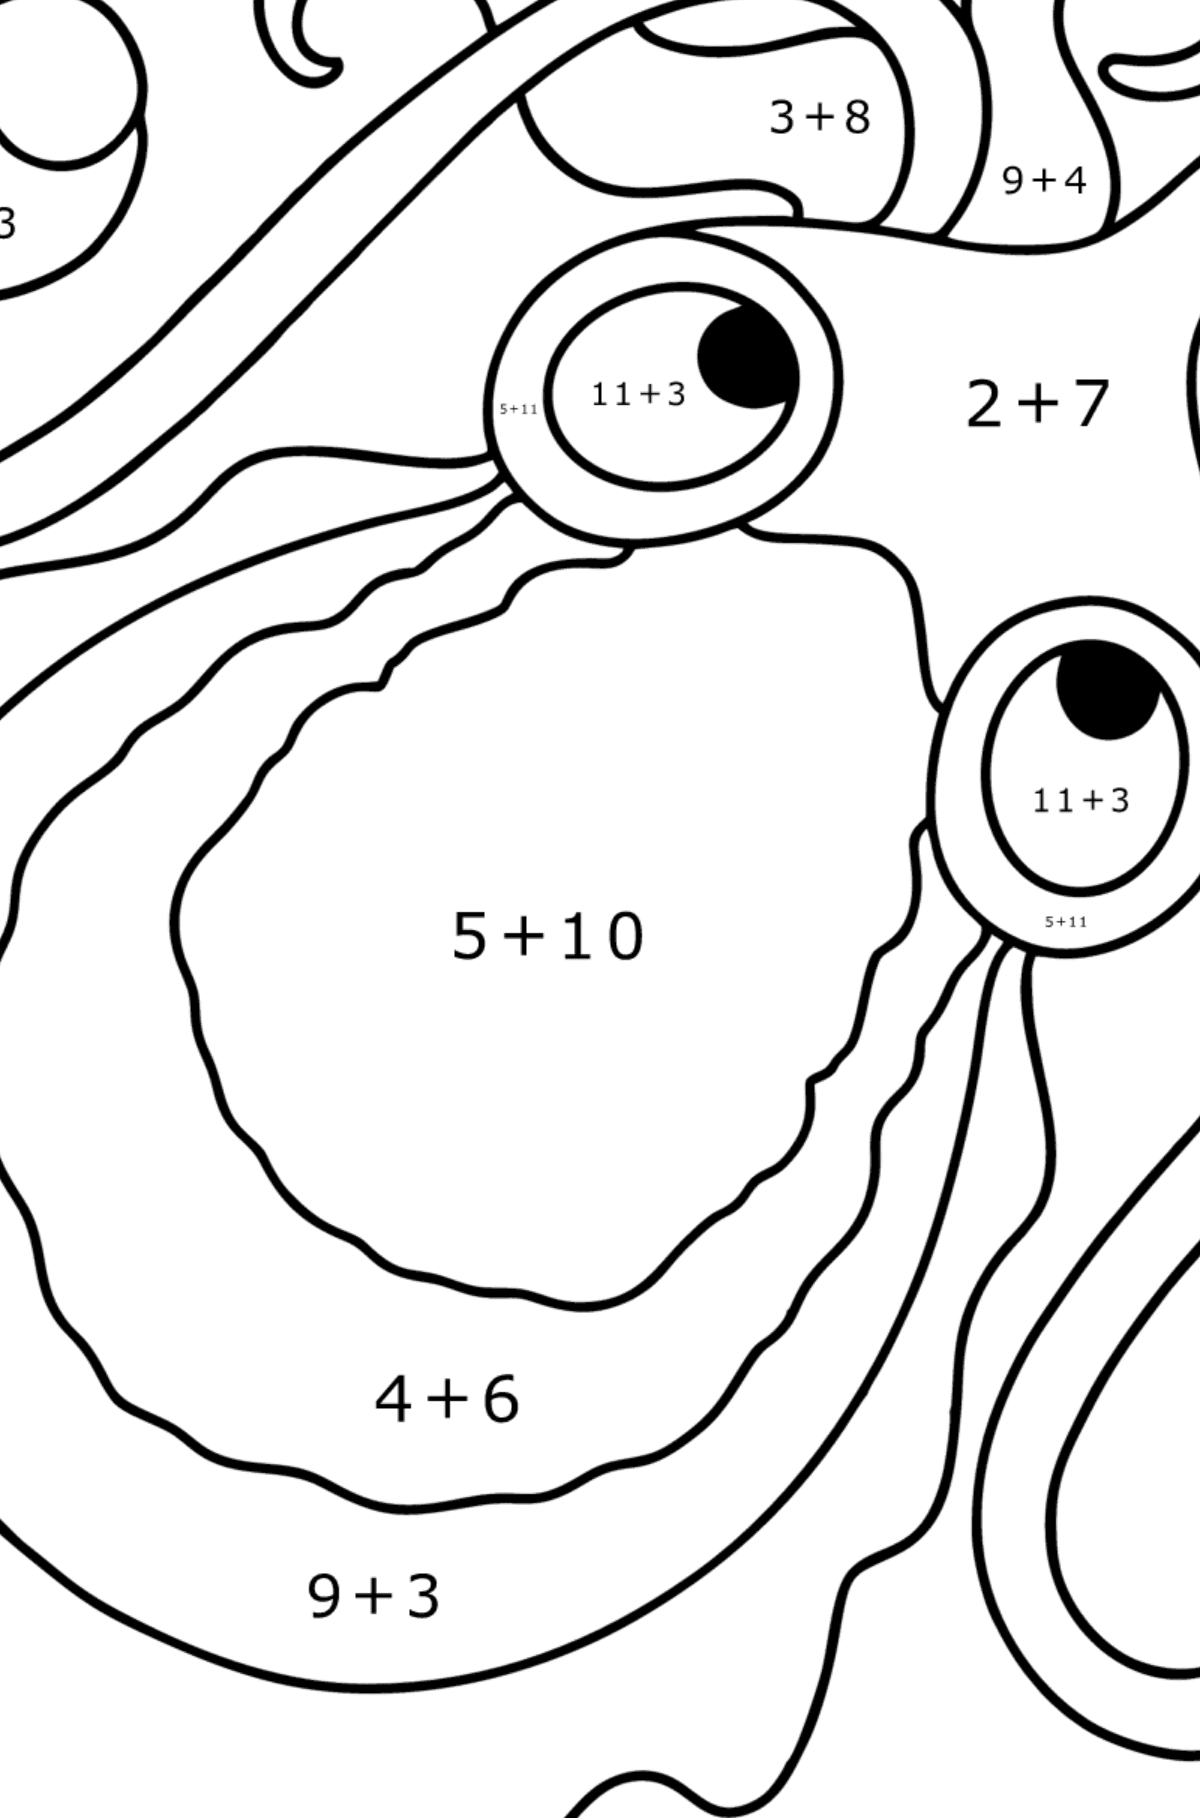 Cuttlefish coloring page - Math Coloring - Addition for Kids